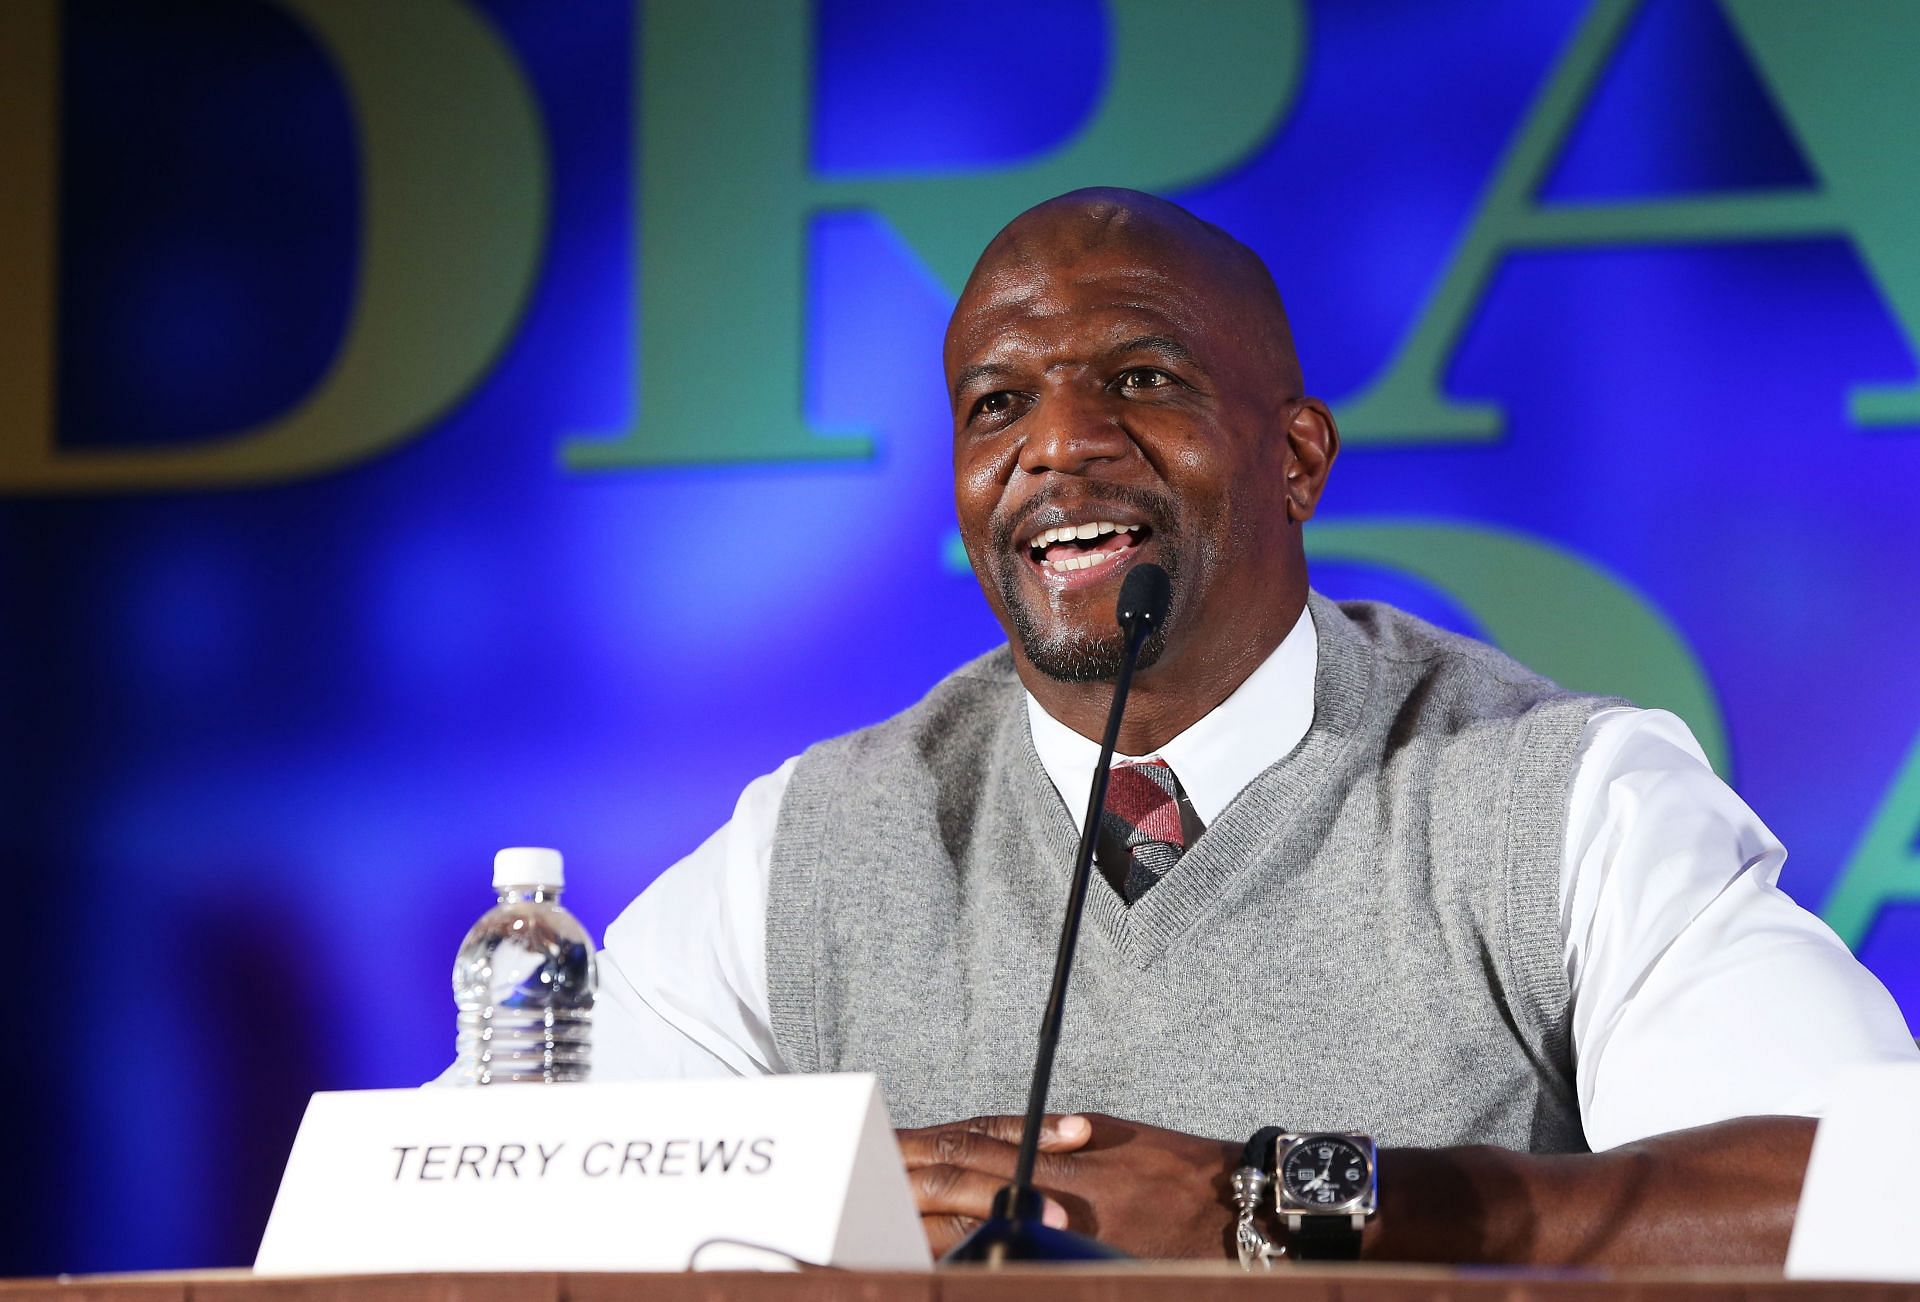 Terry Crews at the Draft Day Press Conference